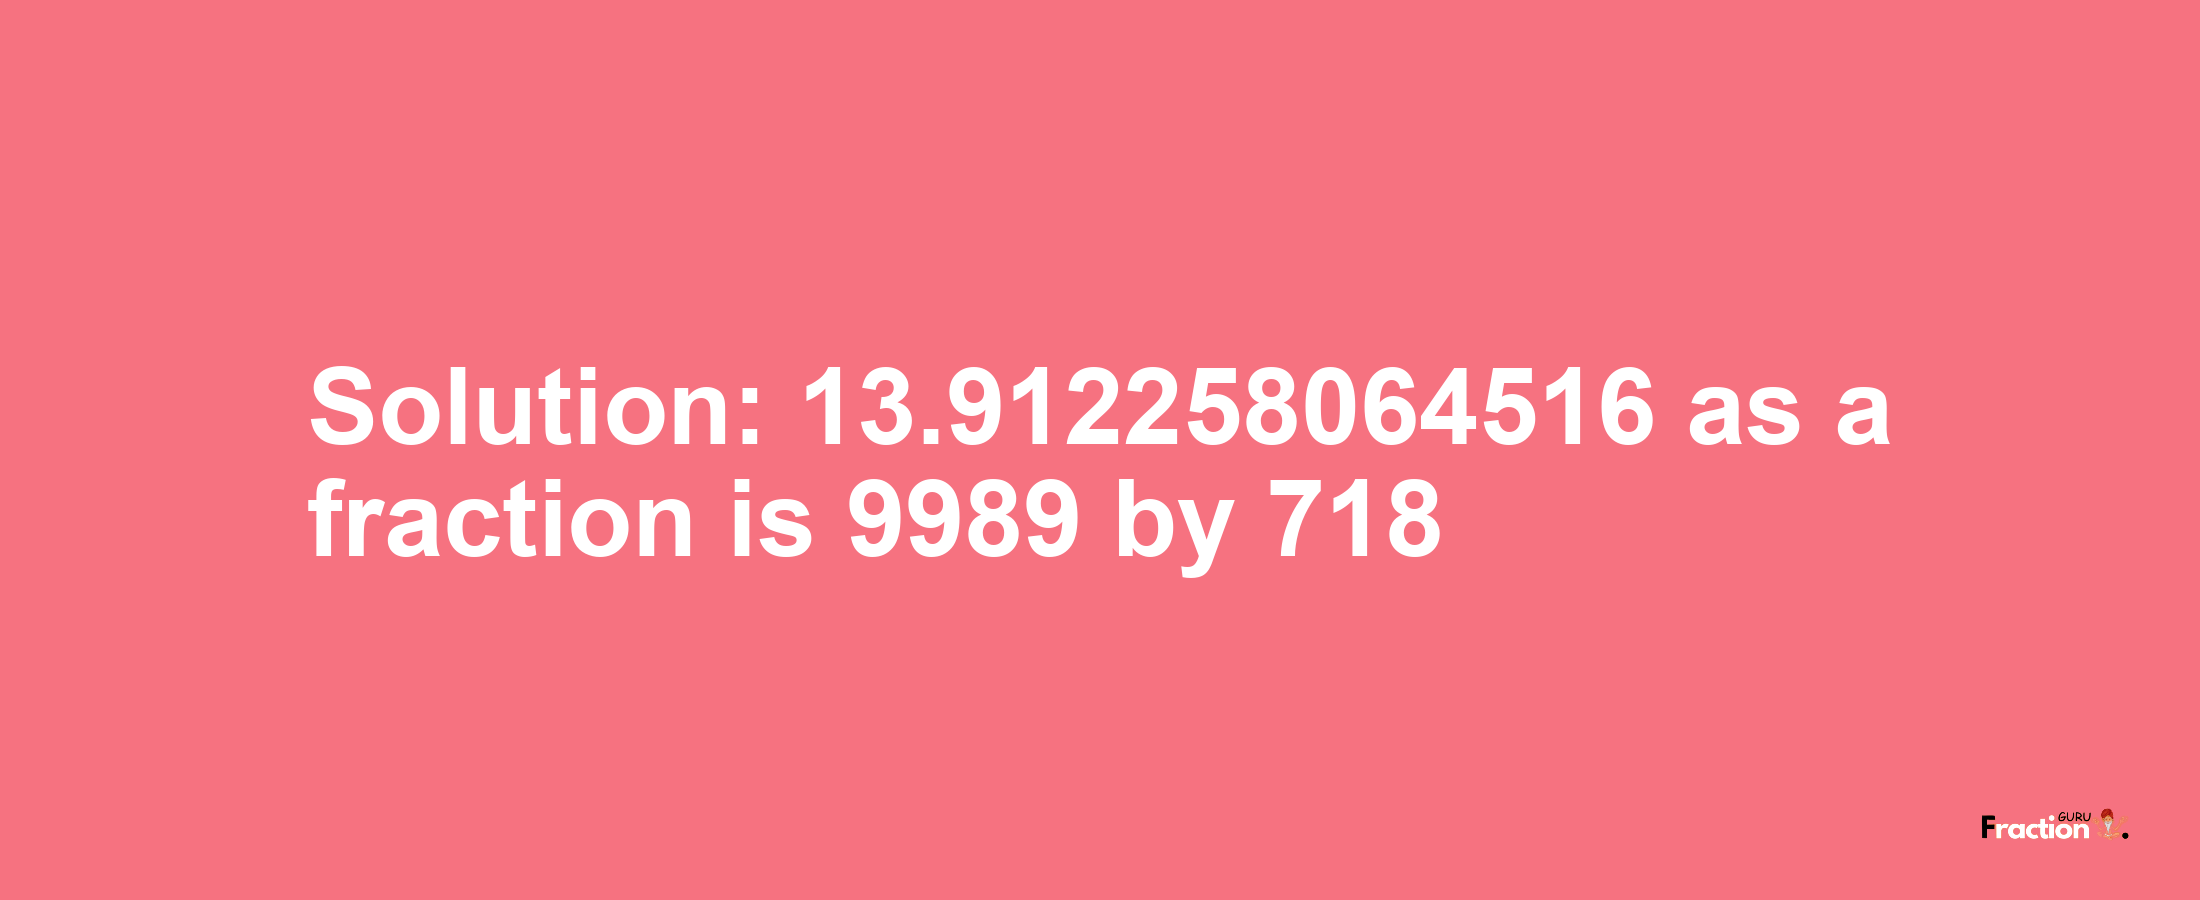 Solution:13.912258064516 as a fraction is 9989/718